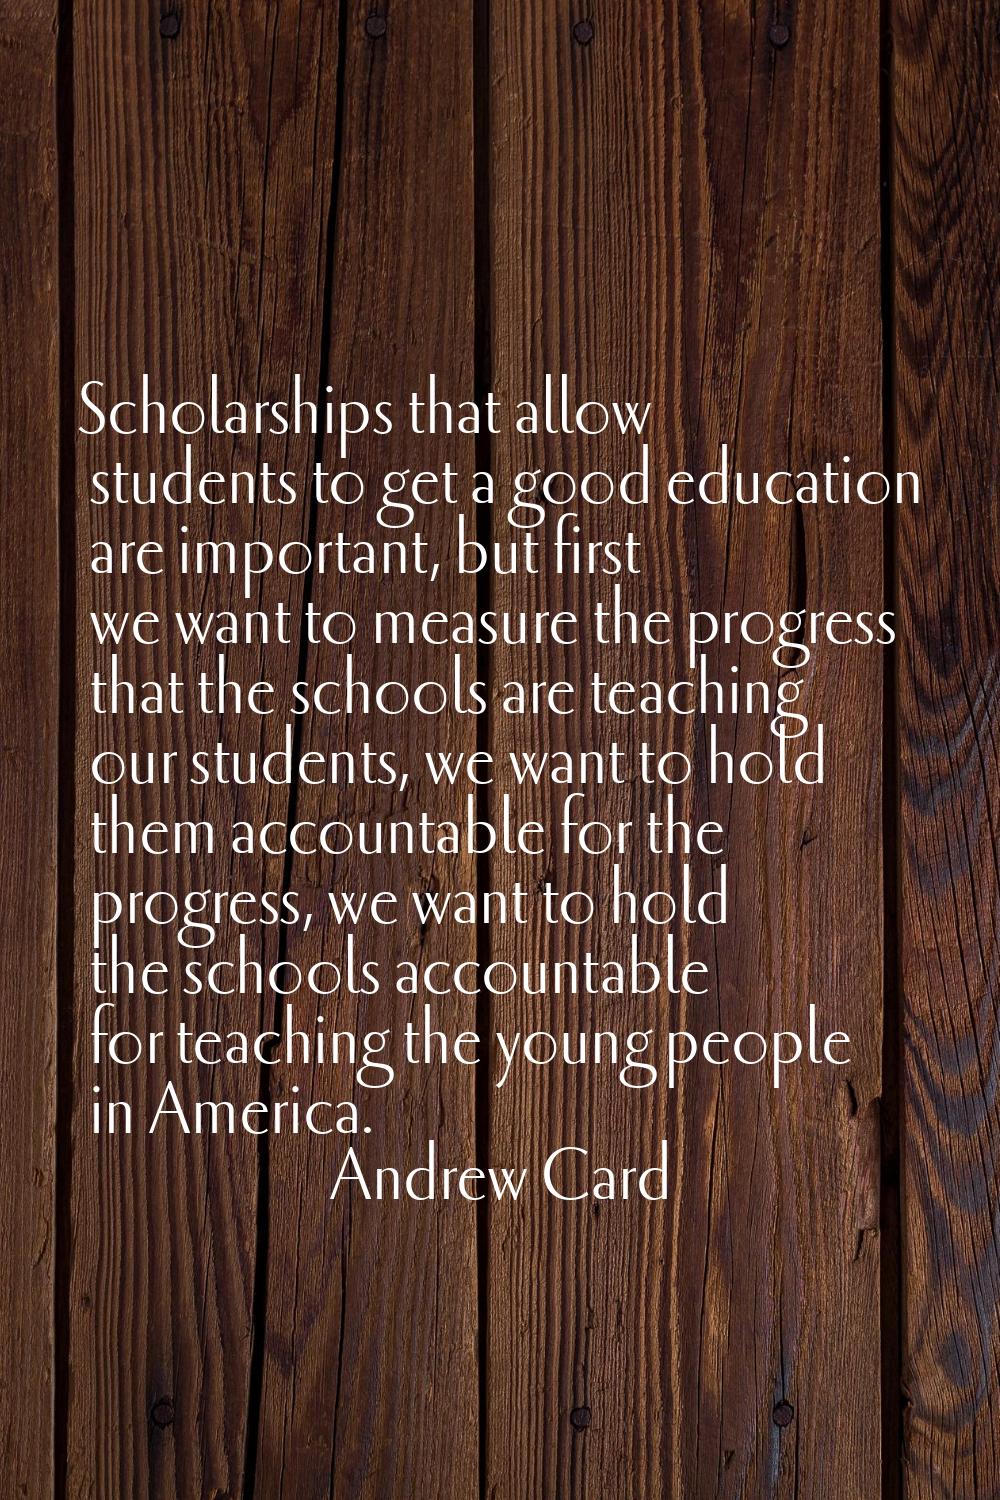 Scholarships that allow students to get a good education are important, but first we want to measur